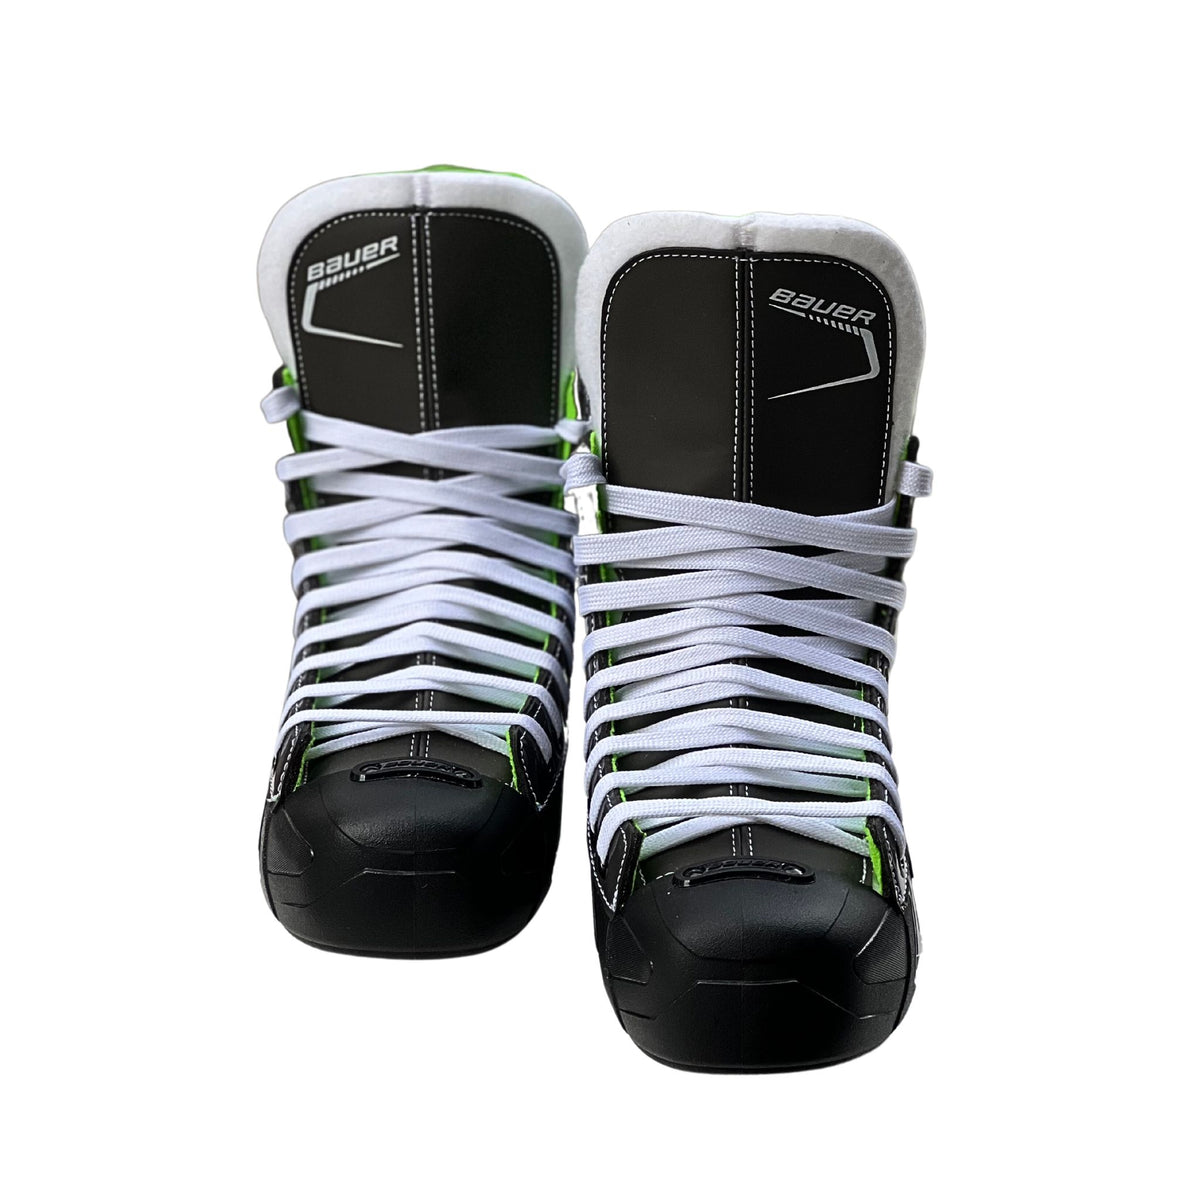 Bauer X-LS Boots - Pair of Boots only - Roller Skates | JT Skate